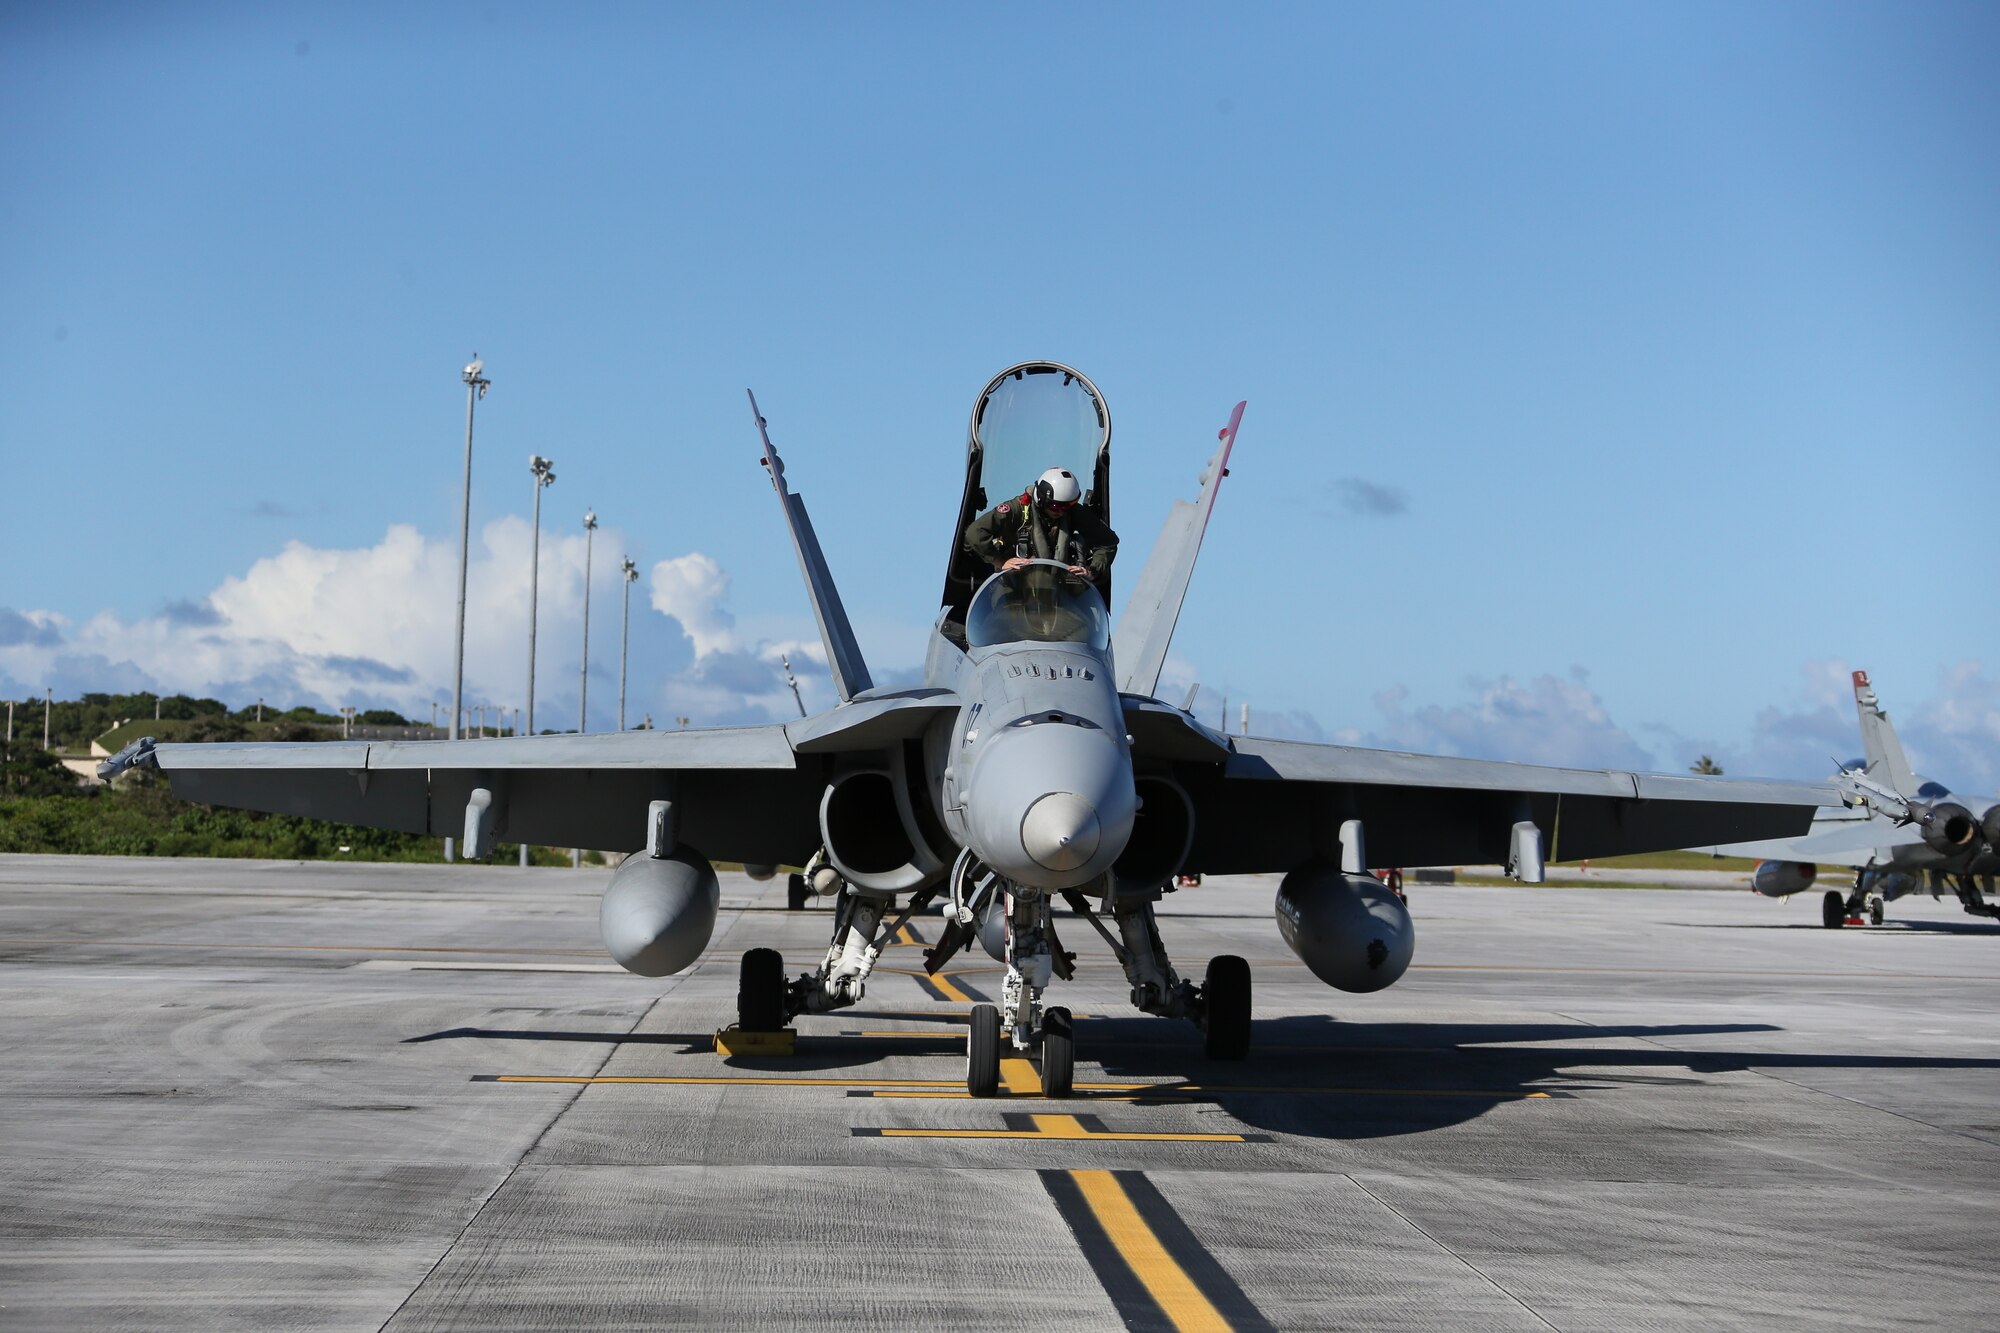 U.S. Marine Corps Capt. Zach Harvey with Marine Fighter Attack Squadron 232 arrives on Andersen Air Force Base, Guam to conduct training and participate in regional exercises, June 16, 2021. The training and exercises enable the squadron to increase operational readiness, improve interoperability and meet training requirements. Marine Corps Base Camp Blaz supports the squadron by providing them aviation hangars and spaces to perform maintenance and repair aircraft. MCB Camp Blaz continues to support units in the region by providing critical administrative and logistical support enabling them conduct training and maintain readiness. (U.S. Marine Corps Photo by Gunnery Sgt. John Ewald)